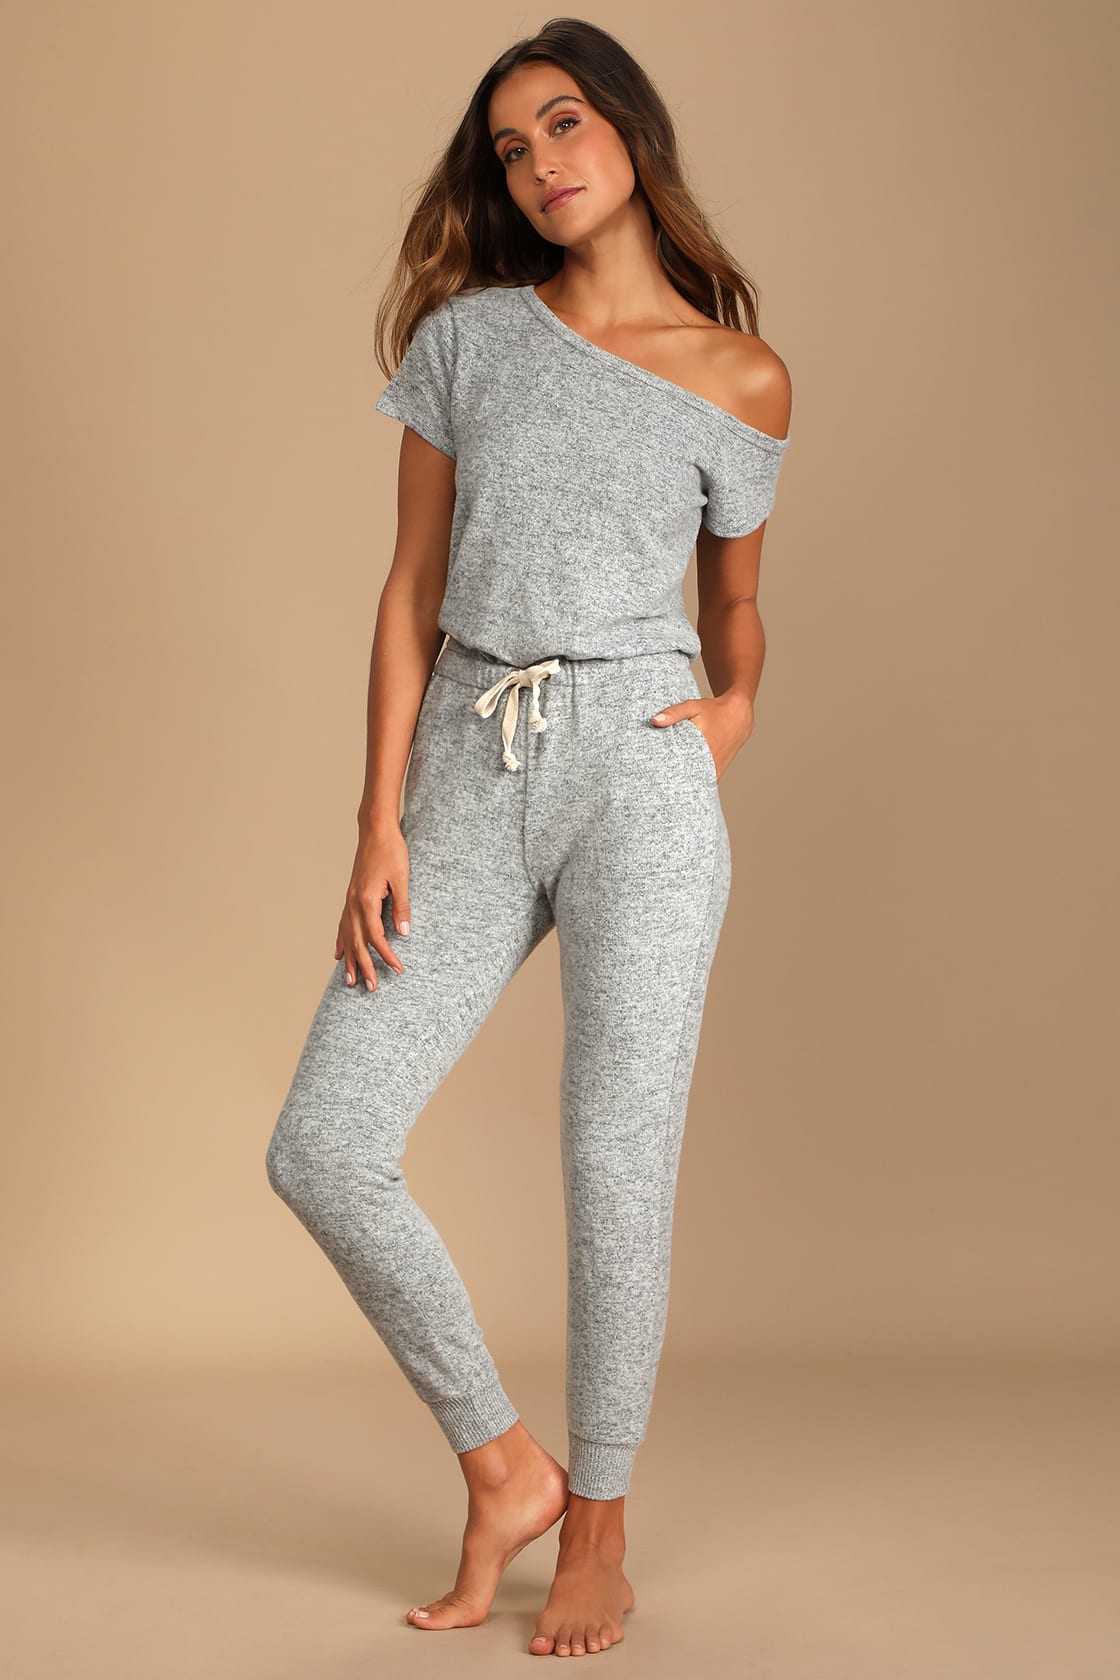 Relaxing Weekend Heather Grey Off-the-Shoulder Lounge Jumpsuit